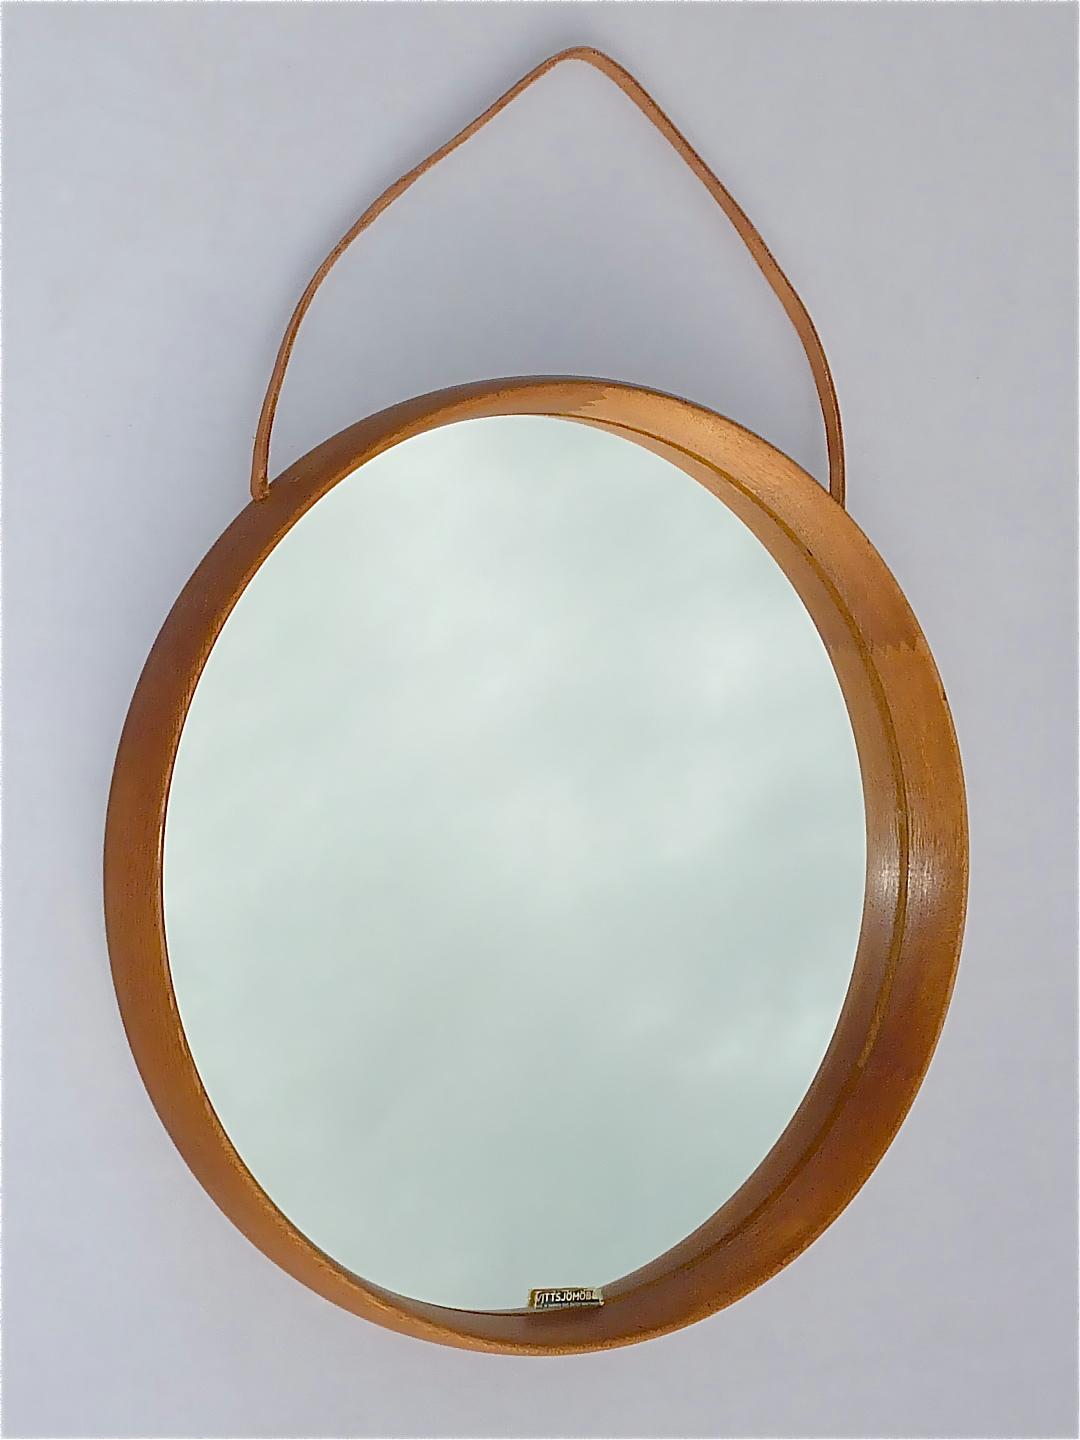 Signed round Swedish brown oak wood wall mirror with leather strap designed by renowned Uno & Östen Kristiansson and produced by Vittsjö möbel in Sweden circa 1960s. The handmade Scandinavian modern mirror of high quality which has a width of 45 cm